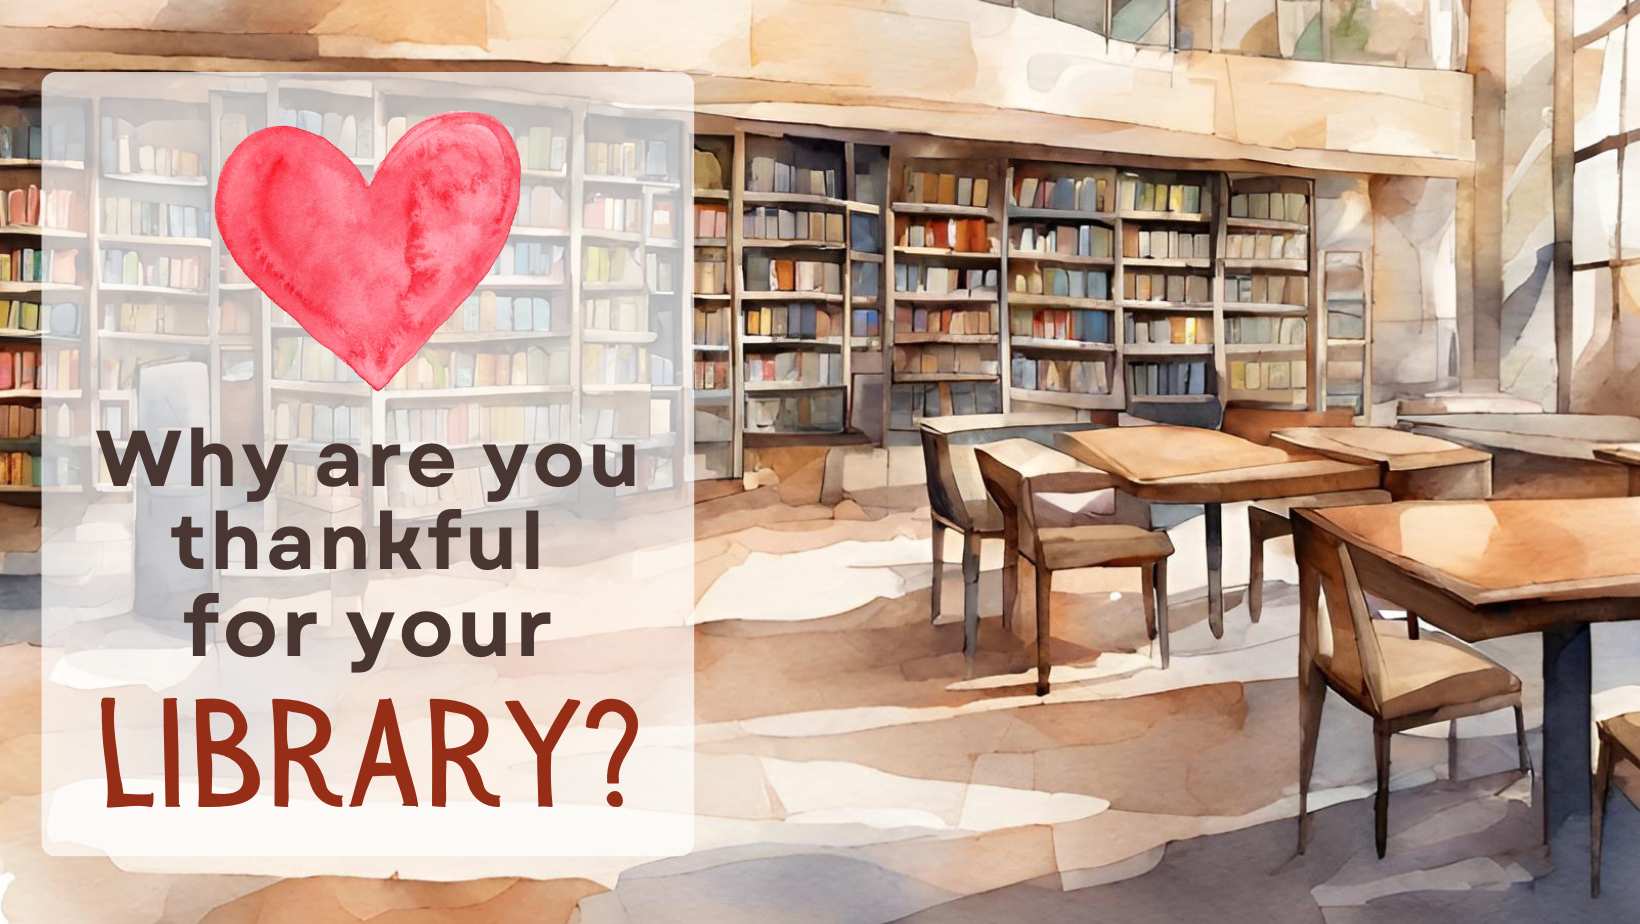 Image that reads: "Why are you thankful for your library" with a heart above and laid over a library interior scene in a watercolor style.